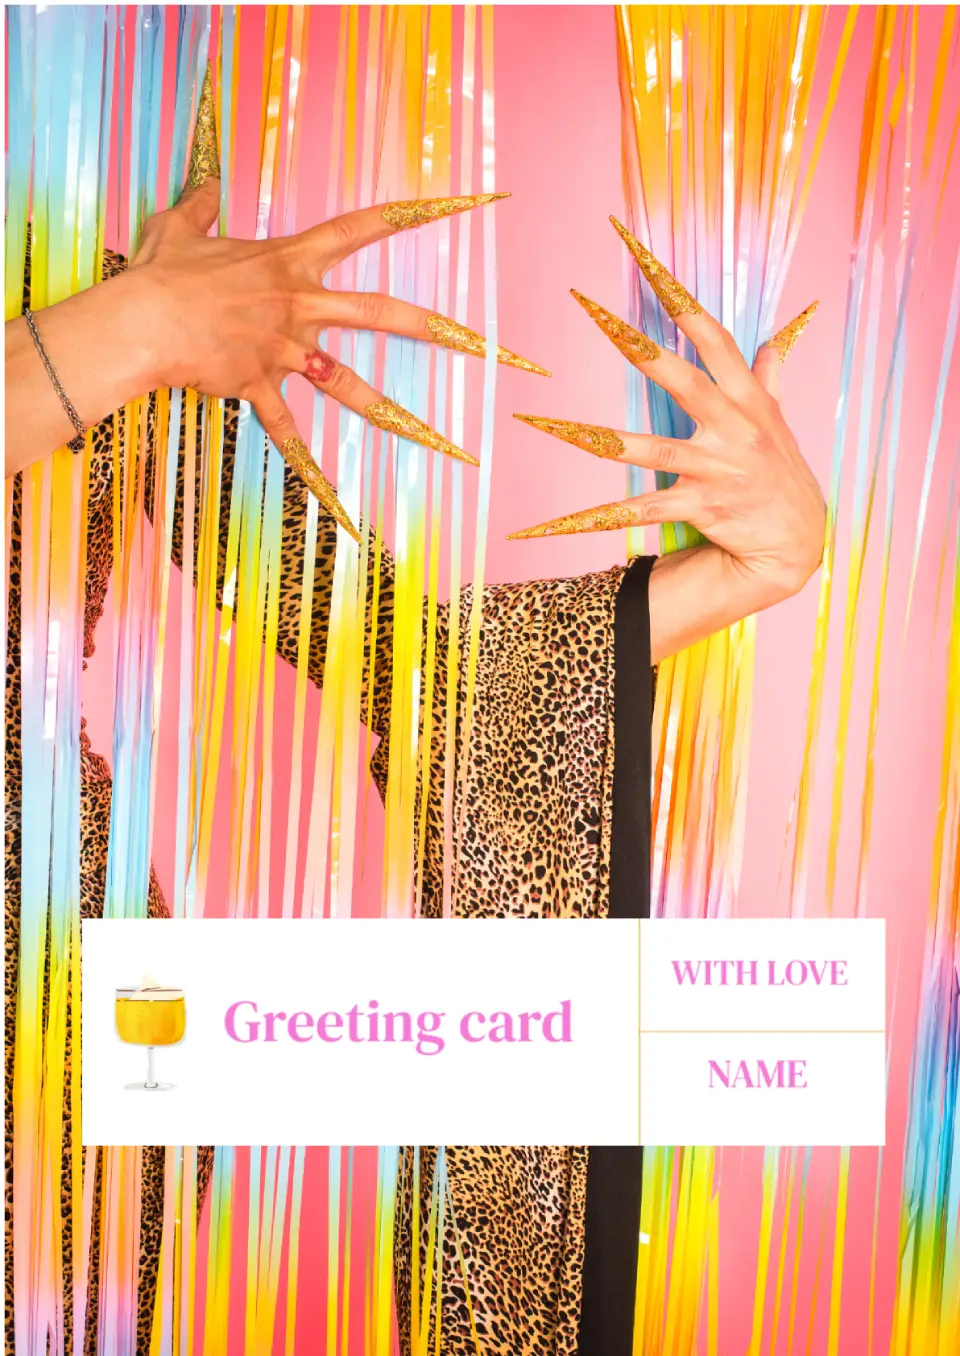 Greeting card template for Google Docs